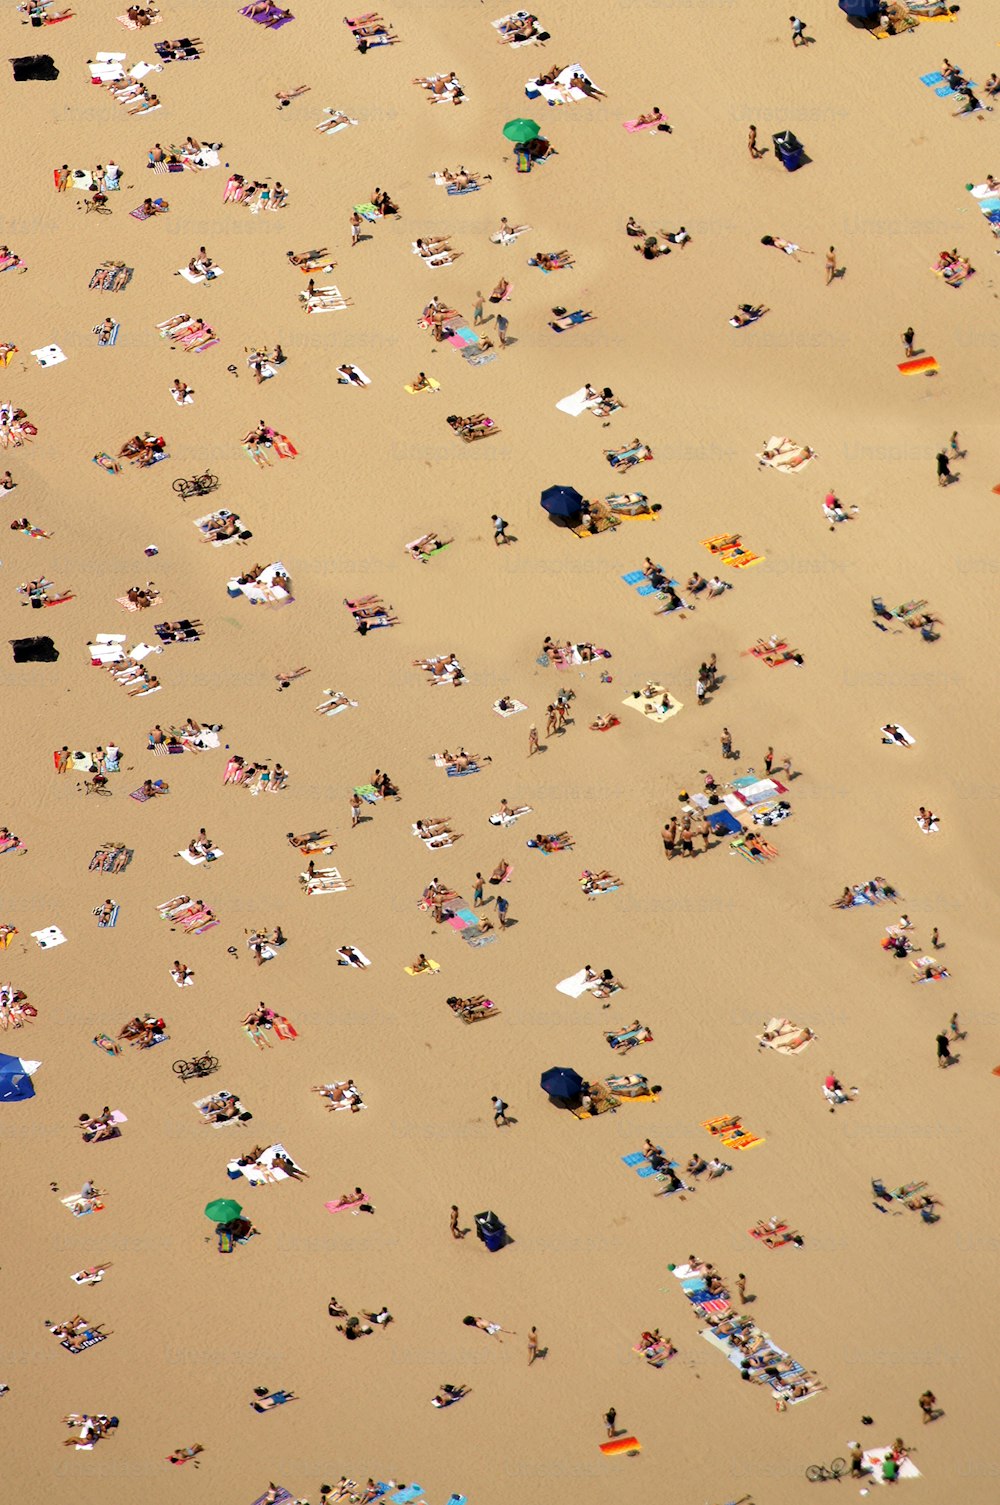 a large group of people laying on top of a sandy beach